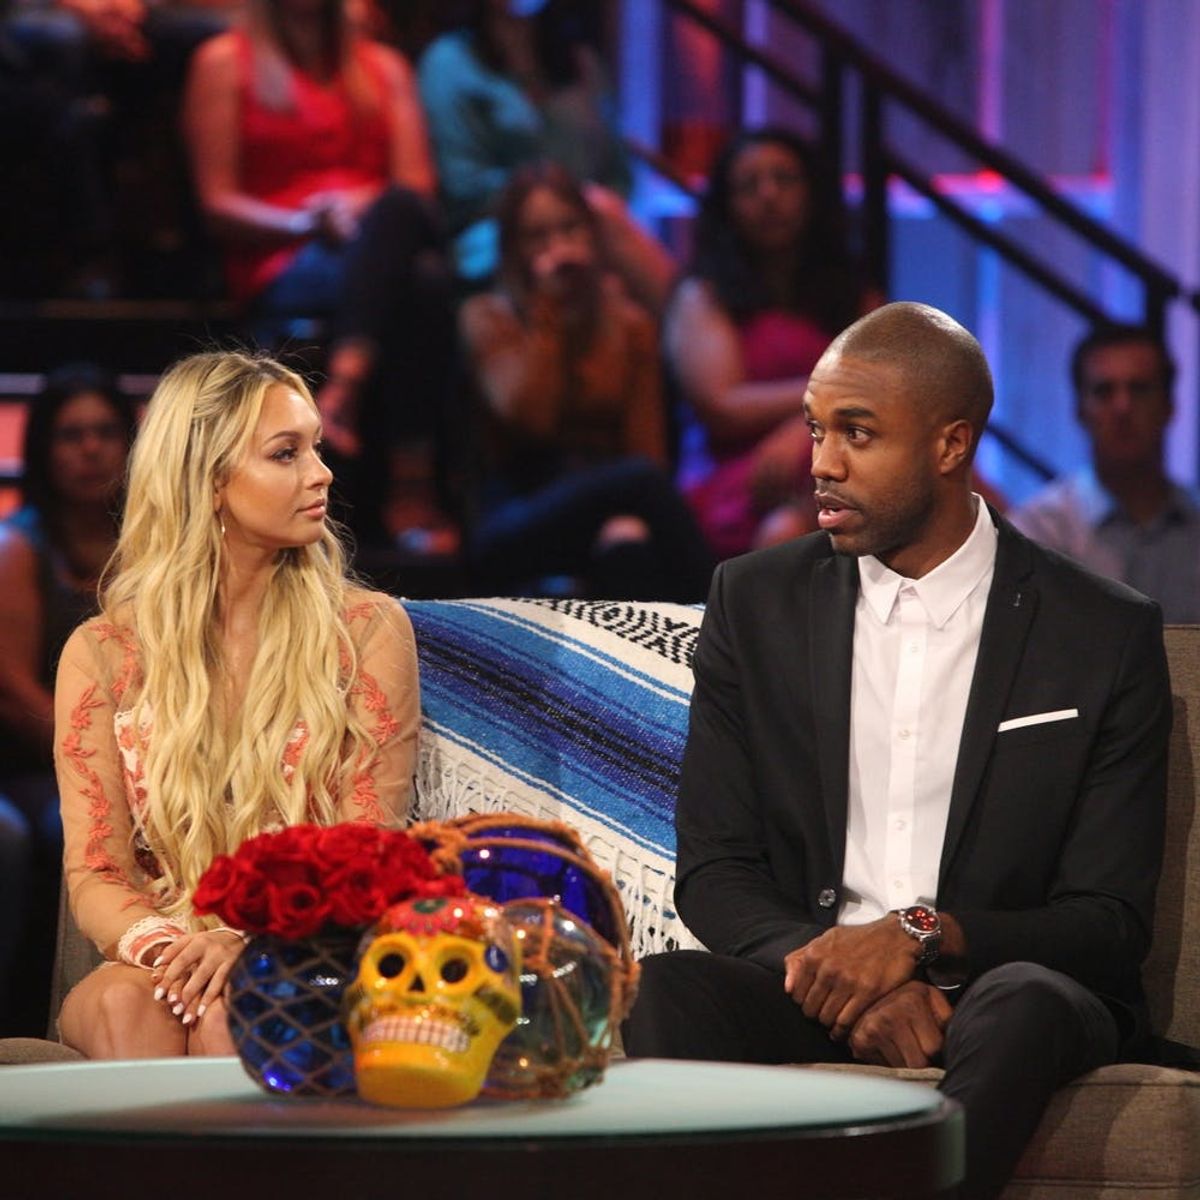 Corinne Olympios Sets the Record Straight After That Disneyland Trip With DeMario Jackson